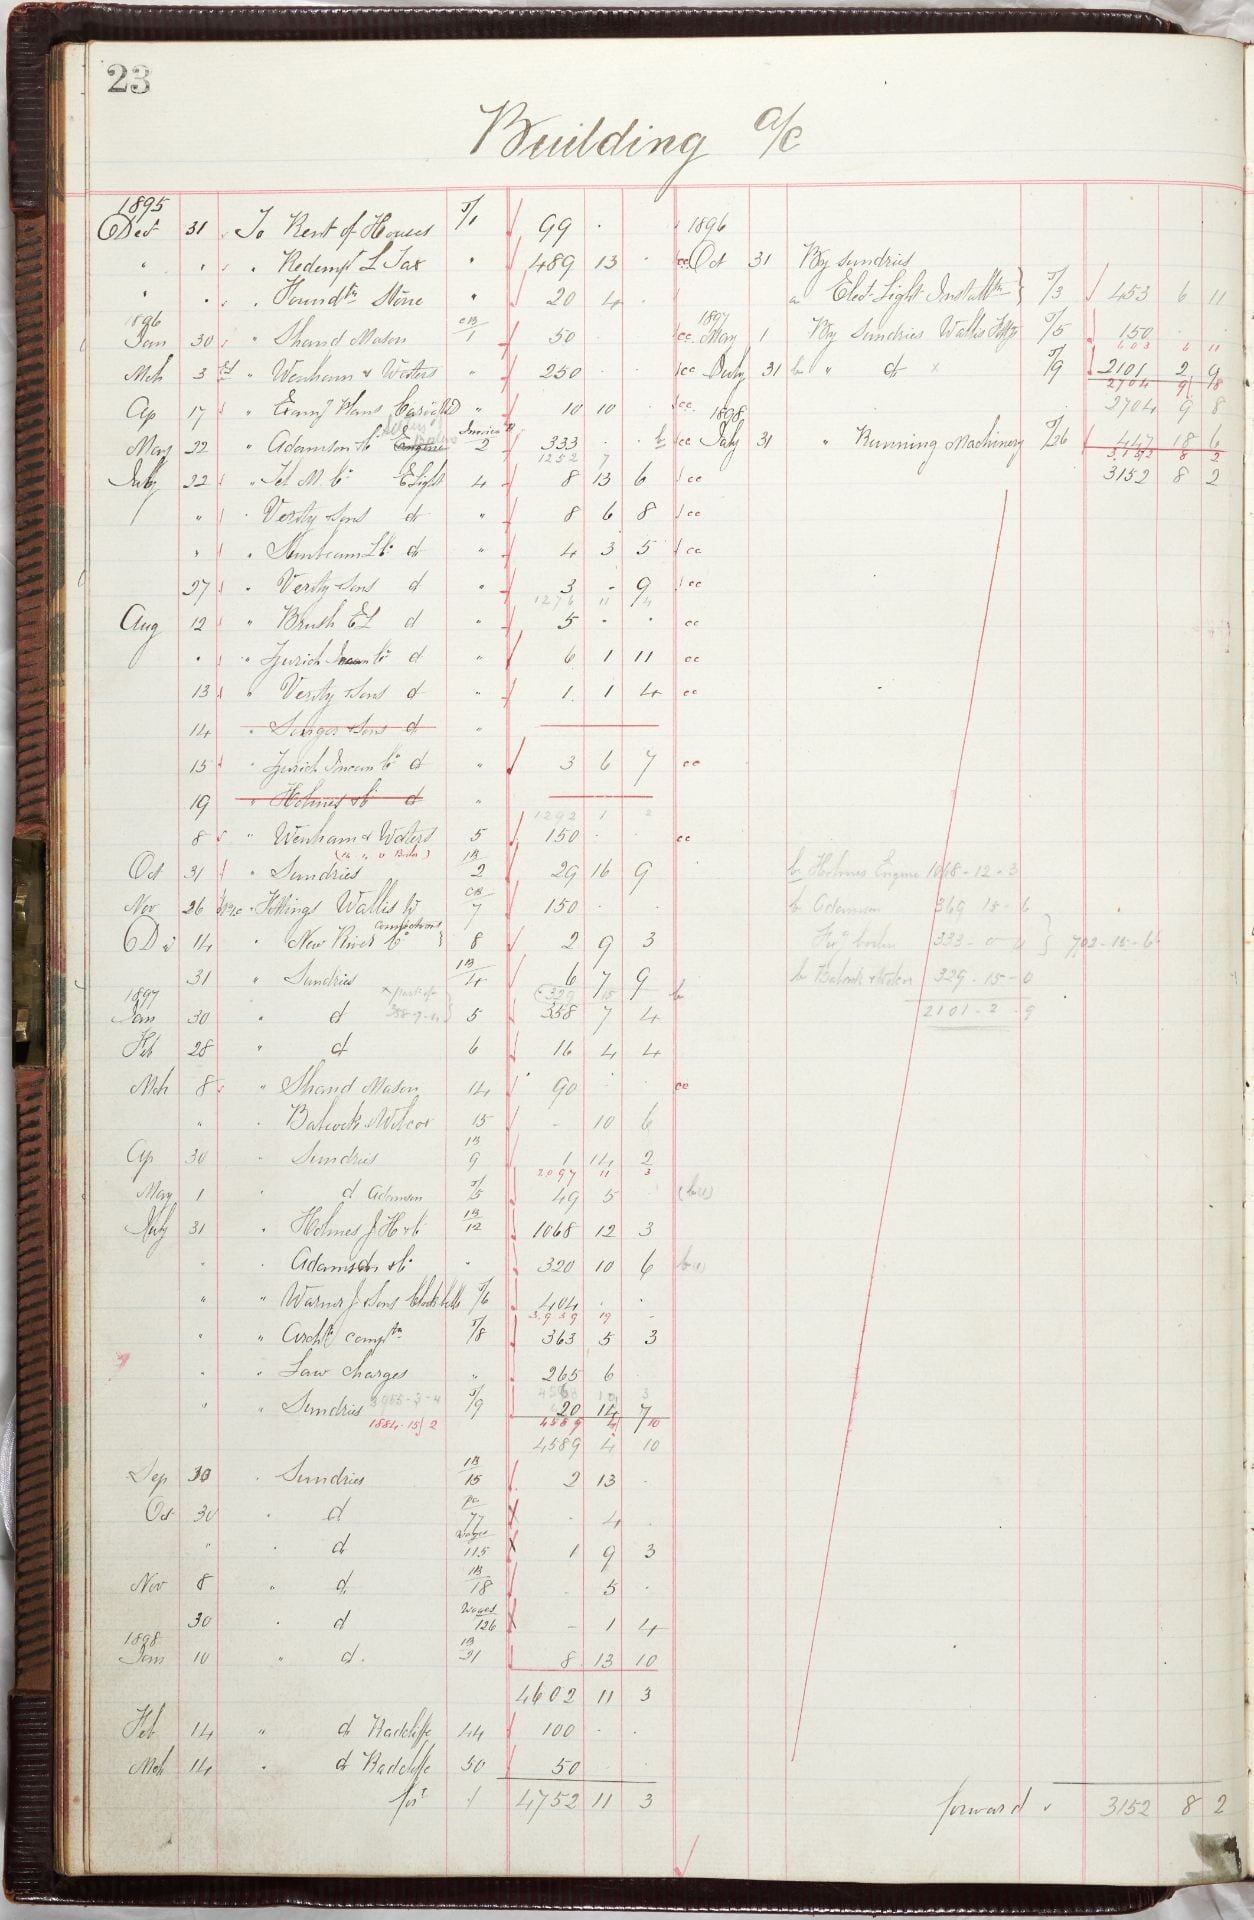 Financial ledger page 23 Building a/c. Costs arising from 1895.